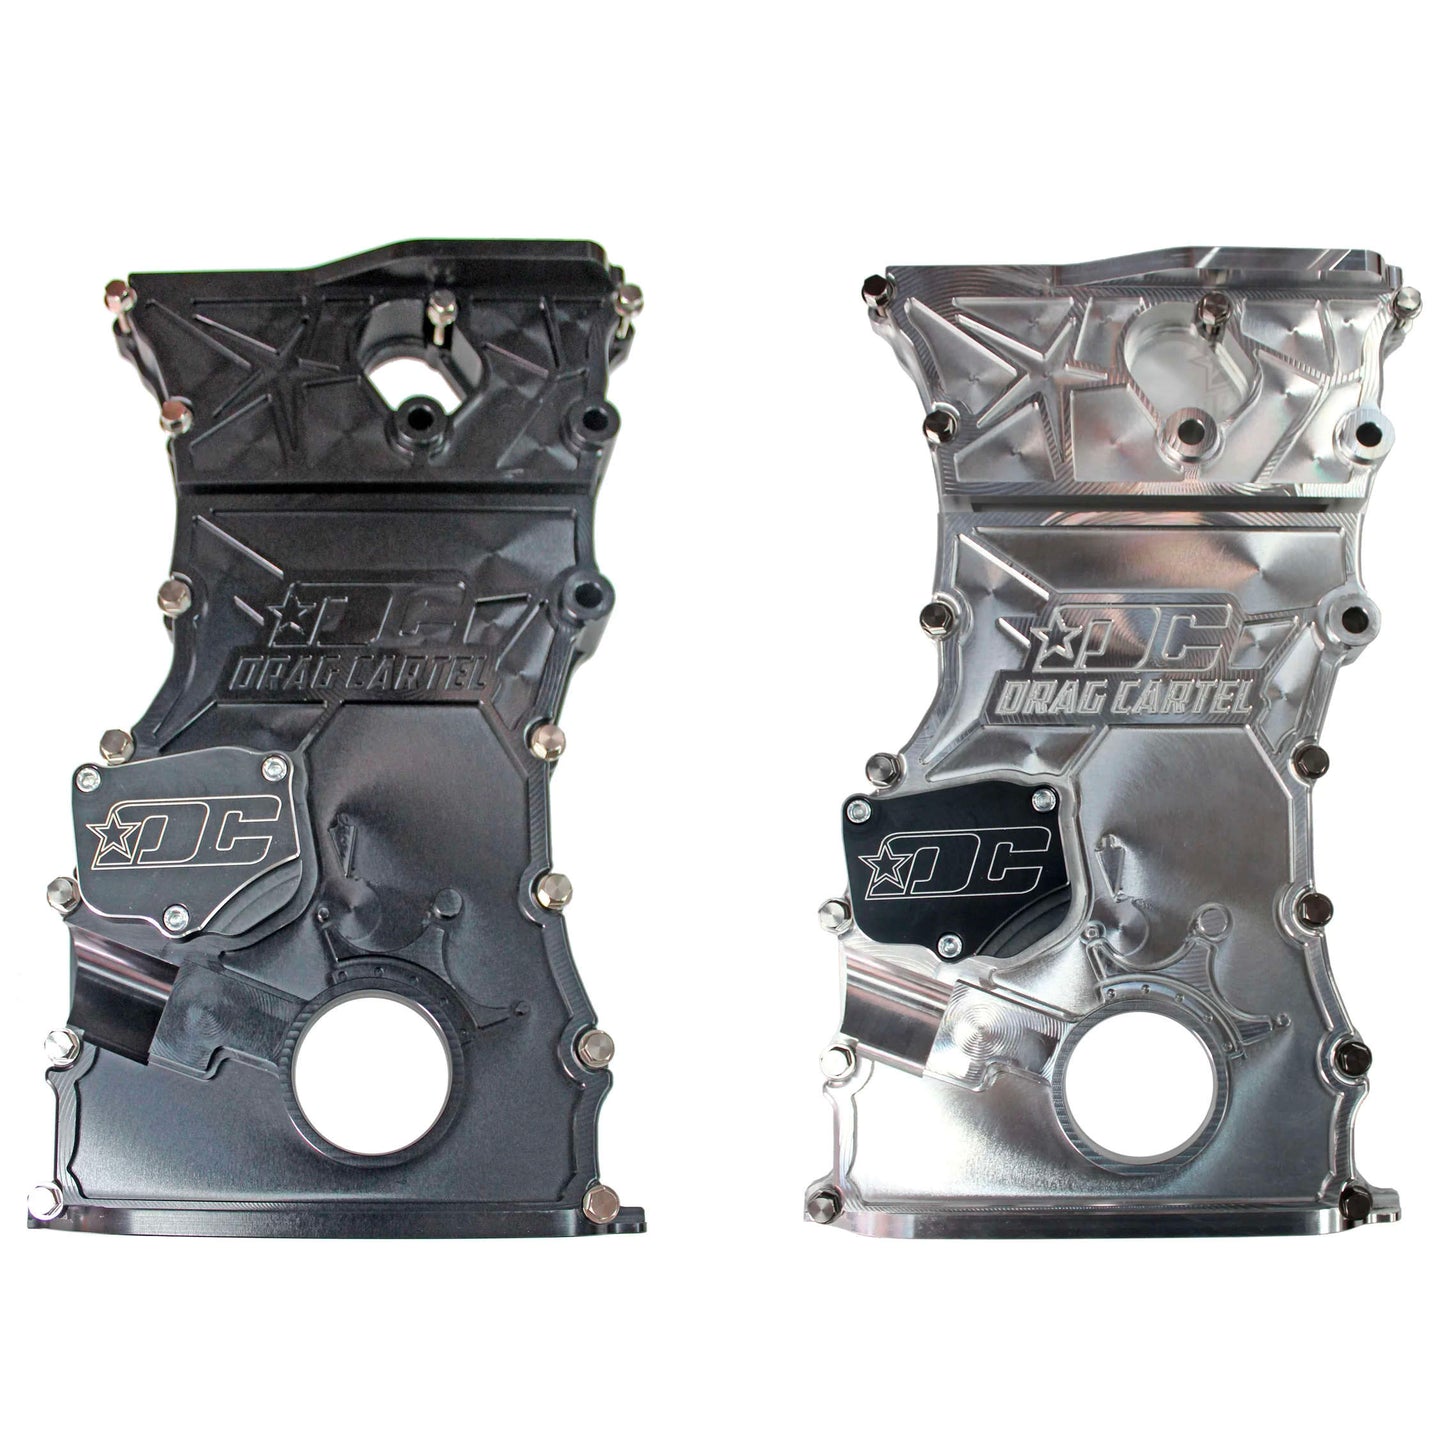 DC BILLET K-SERIES TIMING CHAIN COVER